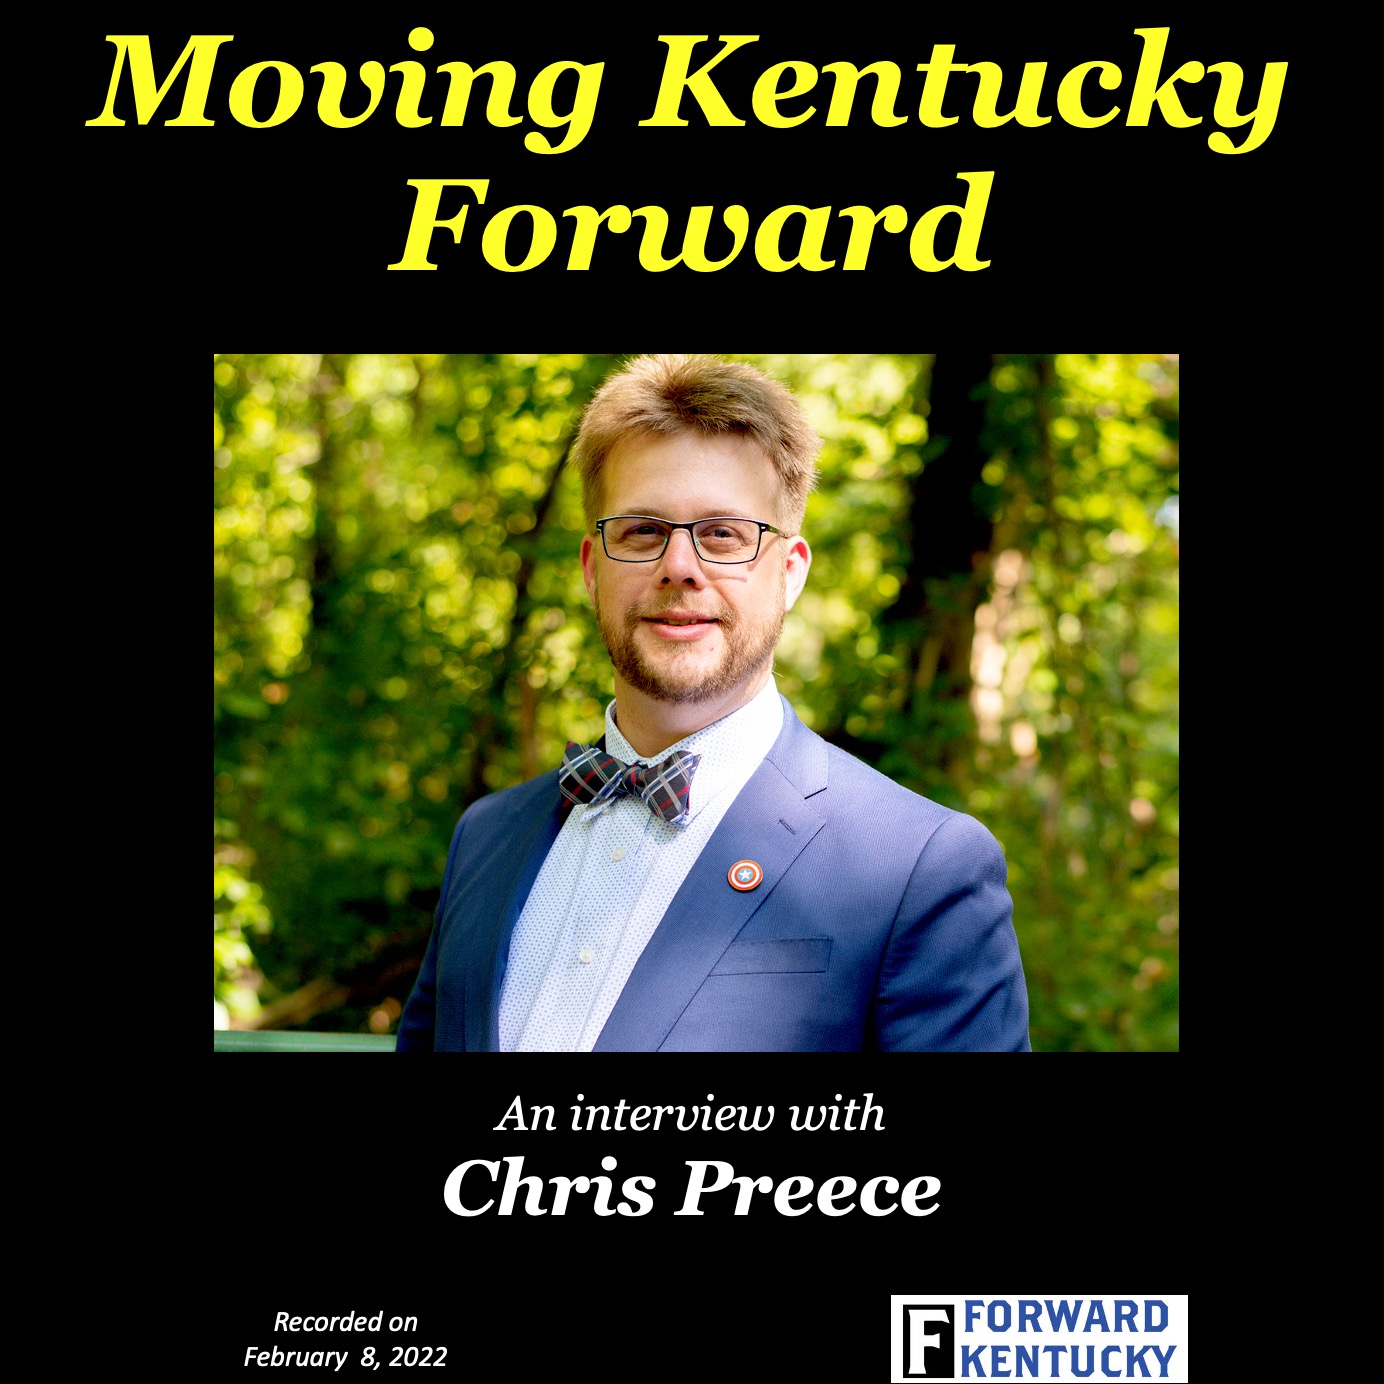 Chris Preece, candidate for KY-06